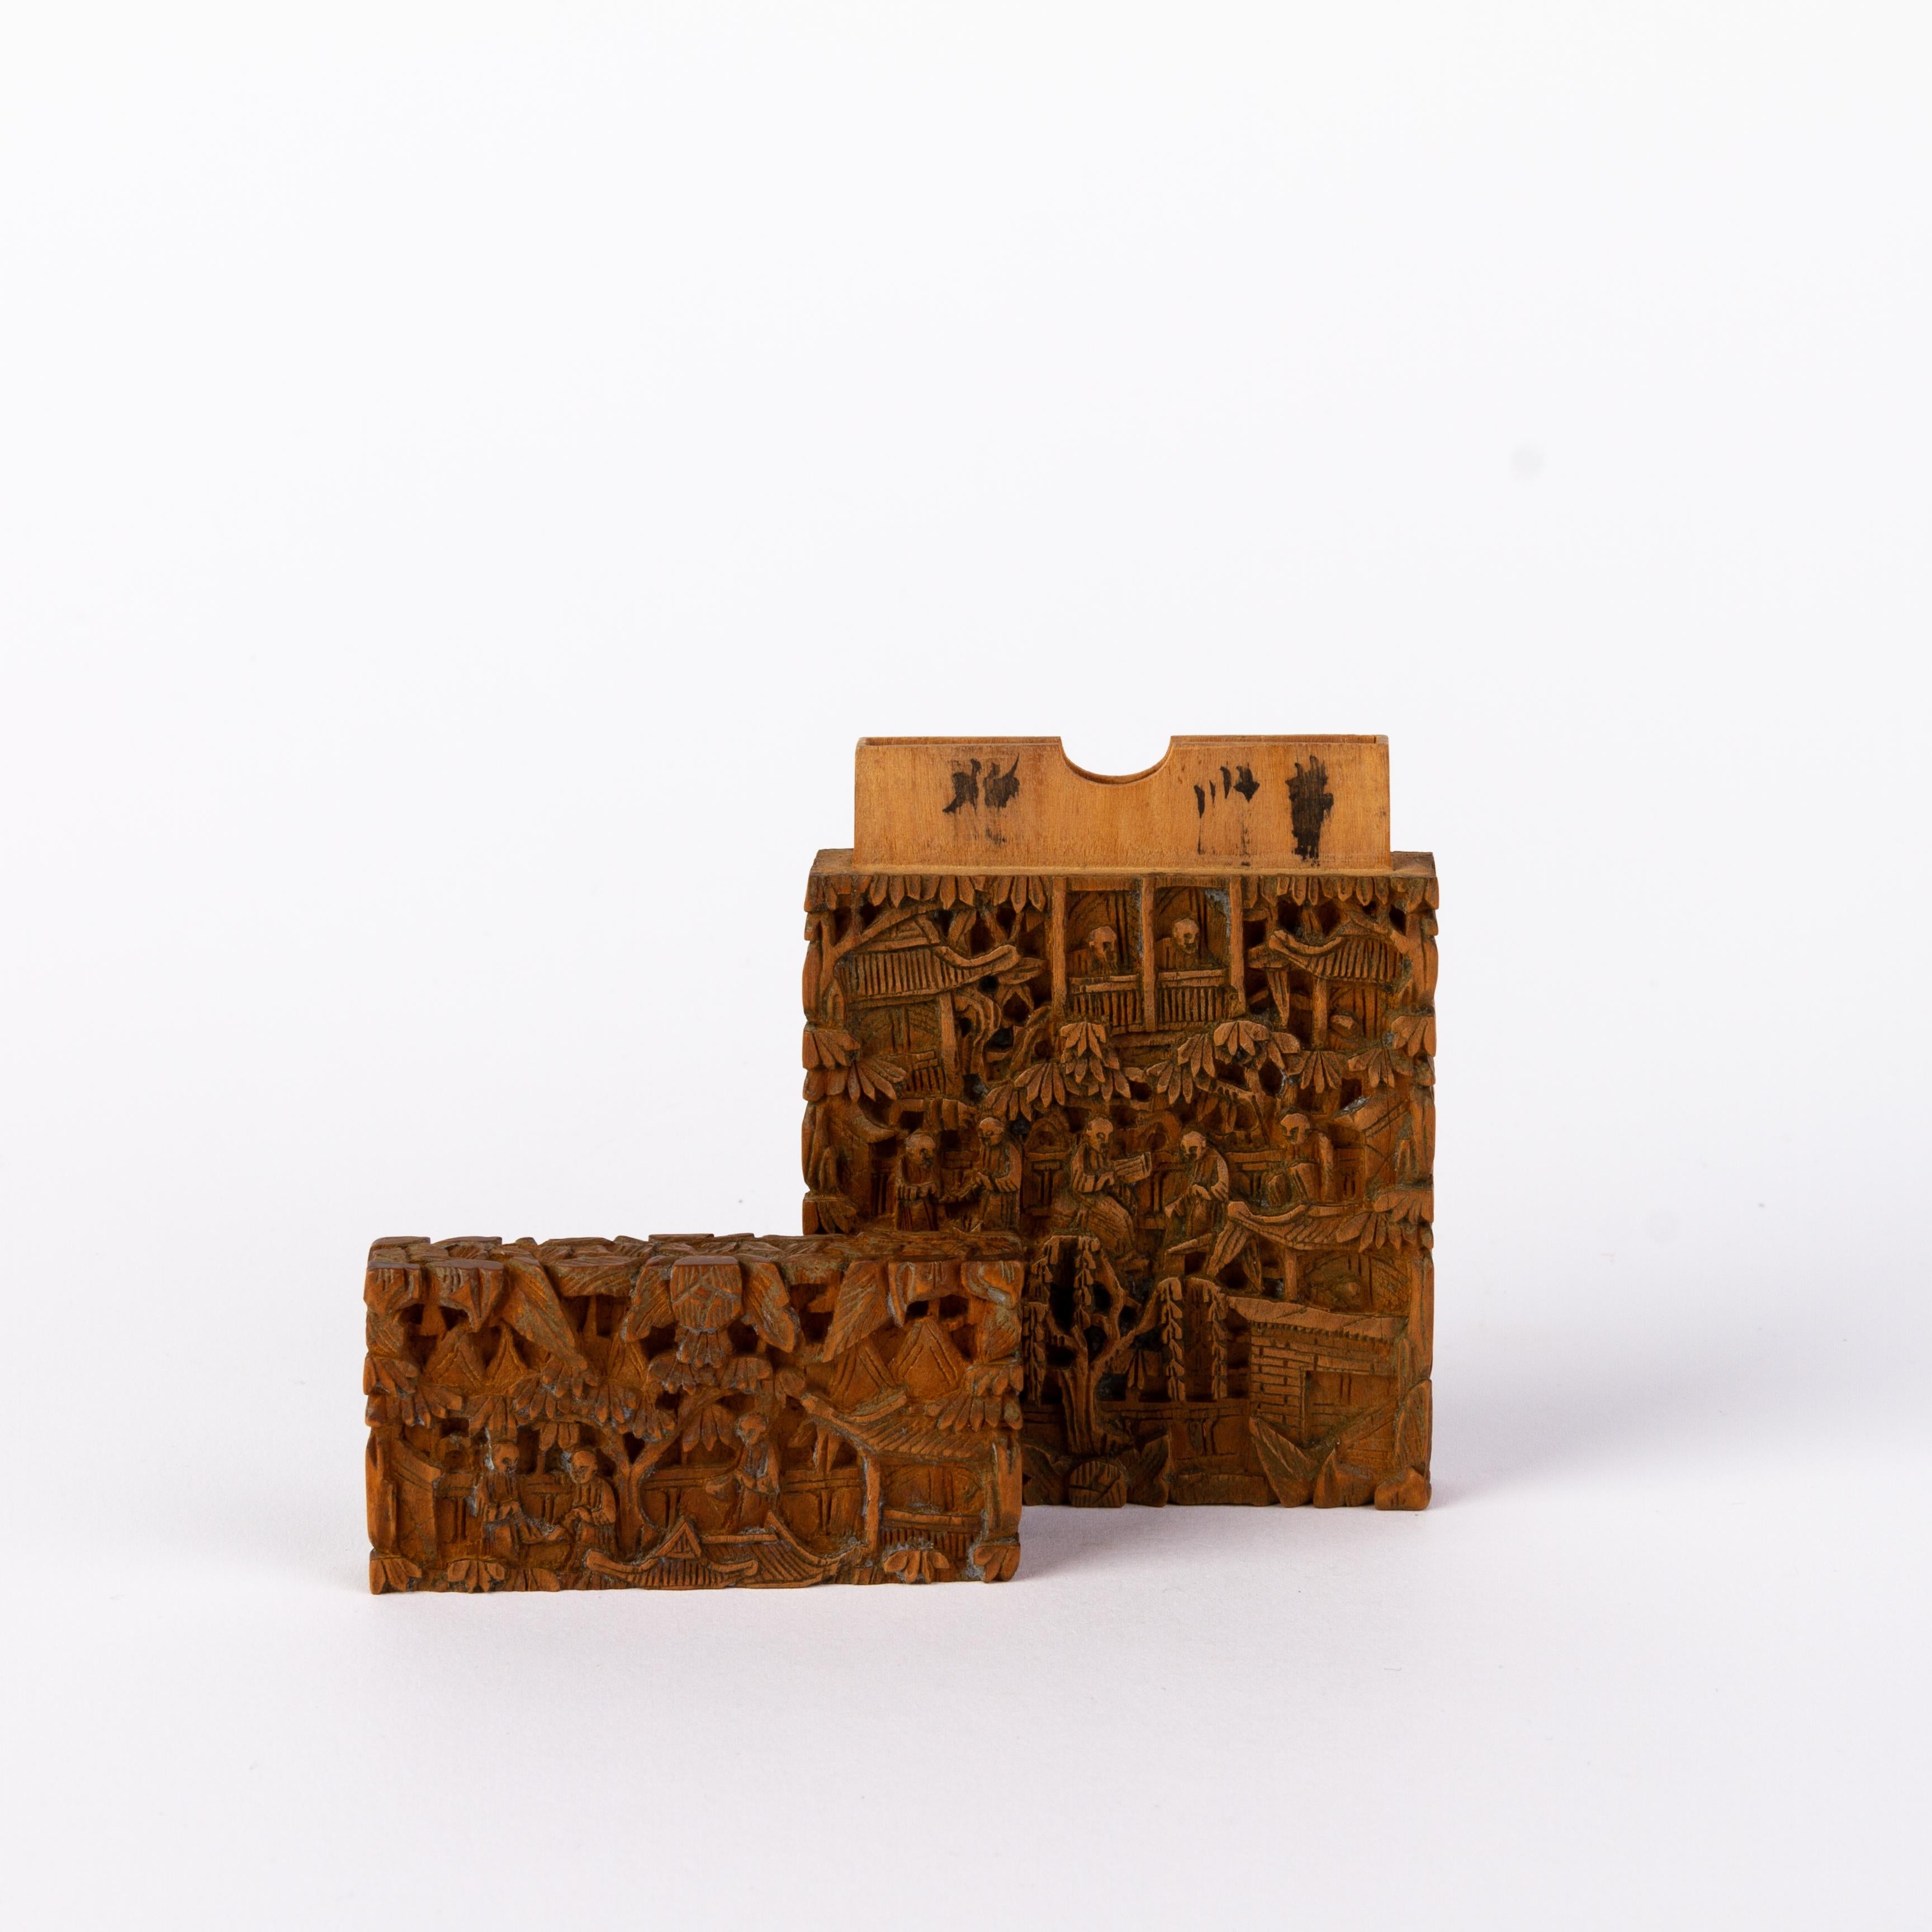 Chinese Qing Carved Boxwood Cantonese Canton Card Case 19th Century 
Good overall condition, as seen.
From a private collection.
Free international shipping.